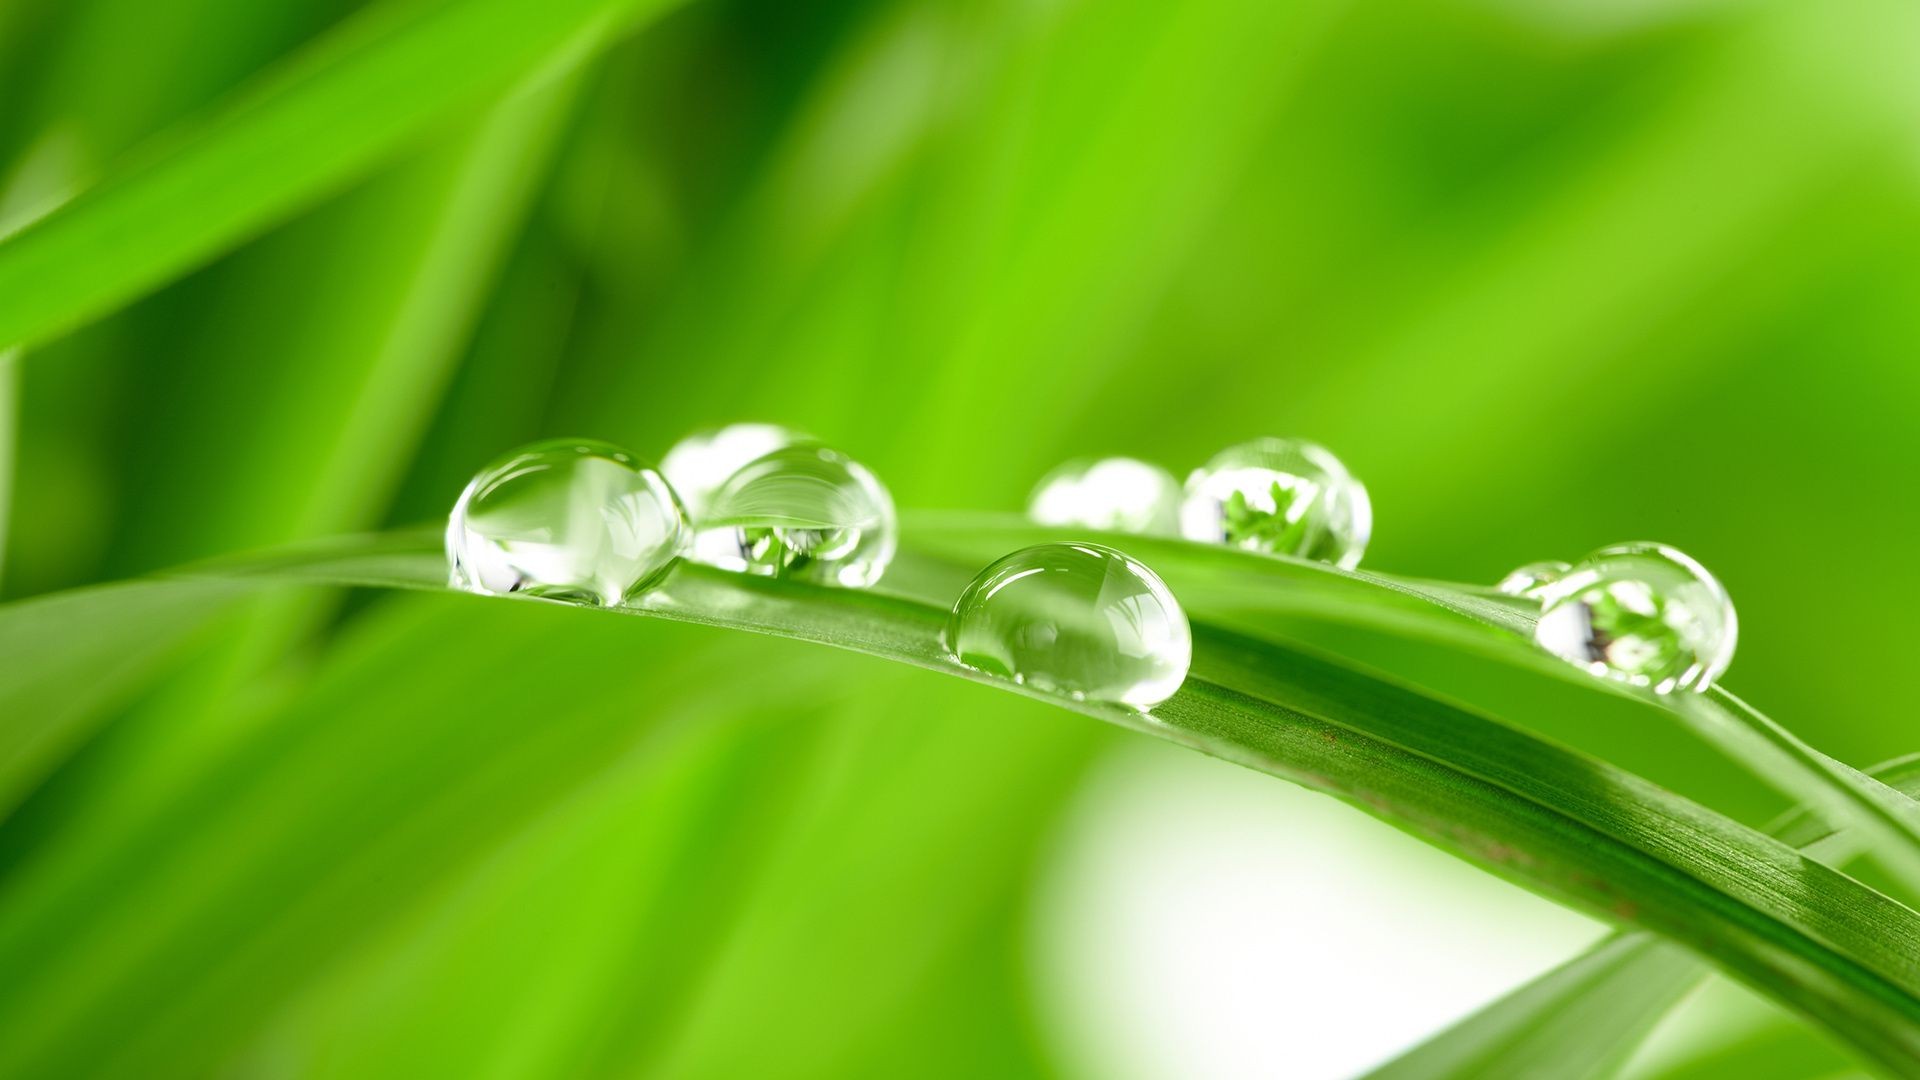 droplets and water dew drop rain droplet leaf flora purity wet growth garden environment freshness raindrop nature blade husk lush harmony water